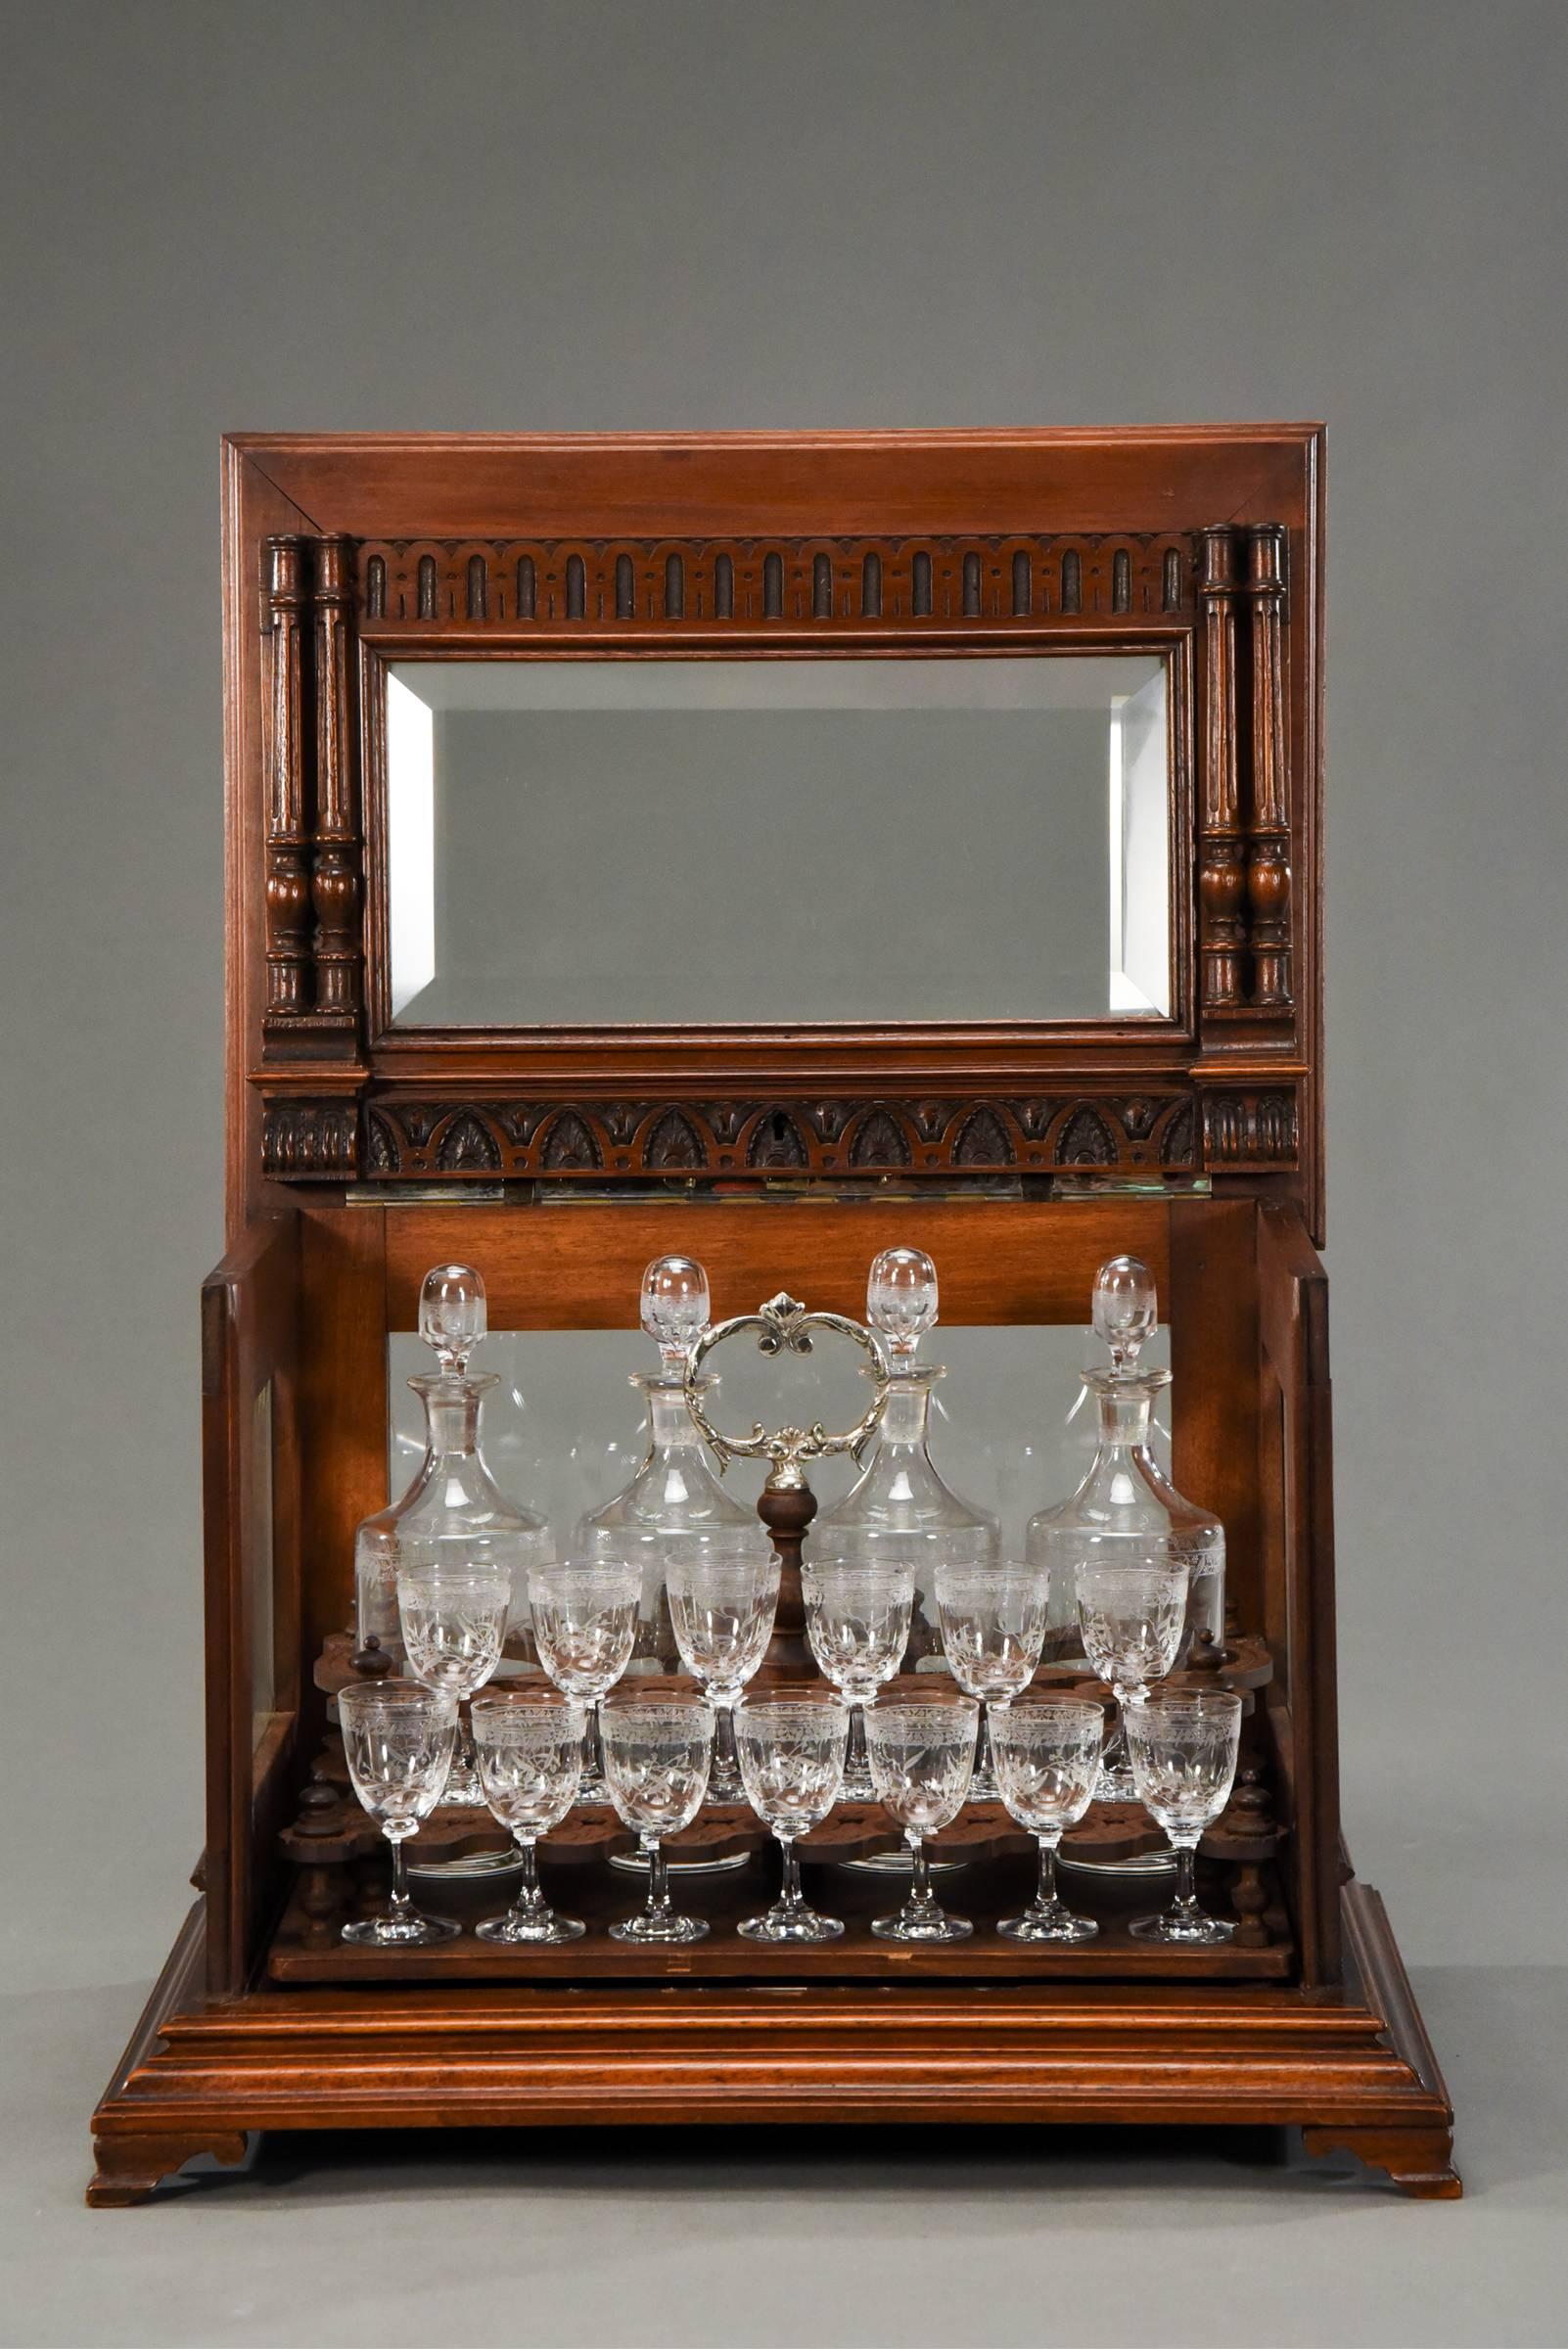 This example of amazing workmanship coupled with a perfect set of hand blown crystal decanters and matching cordials made by Baccarat is hard to believe. Never used, it maintains the original paper labels that Baccarat used to sign their wares until